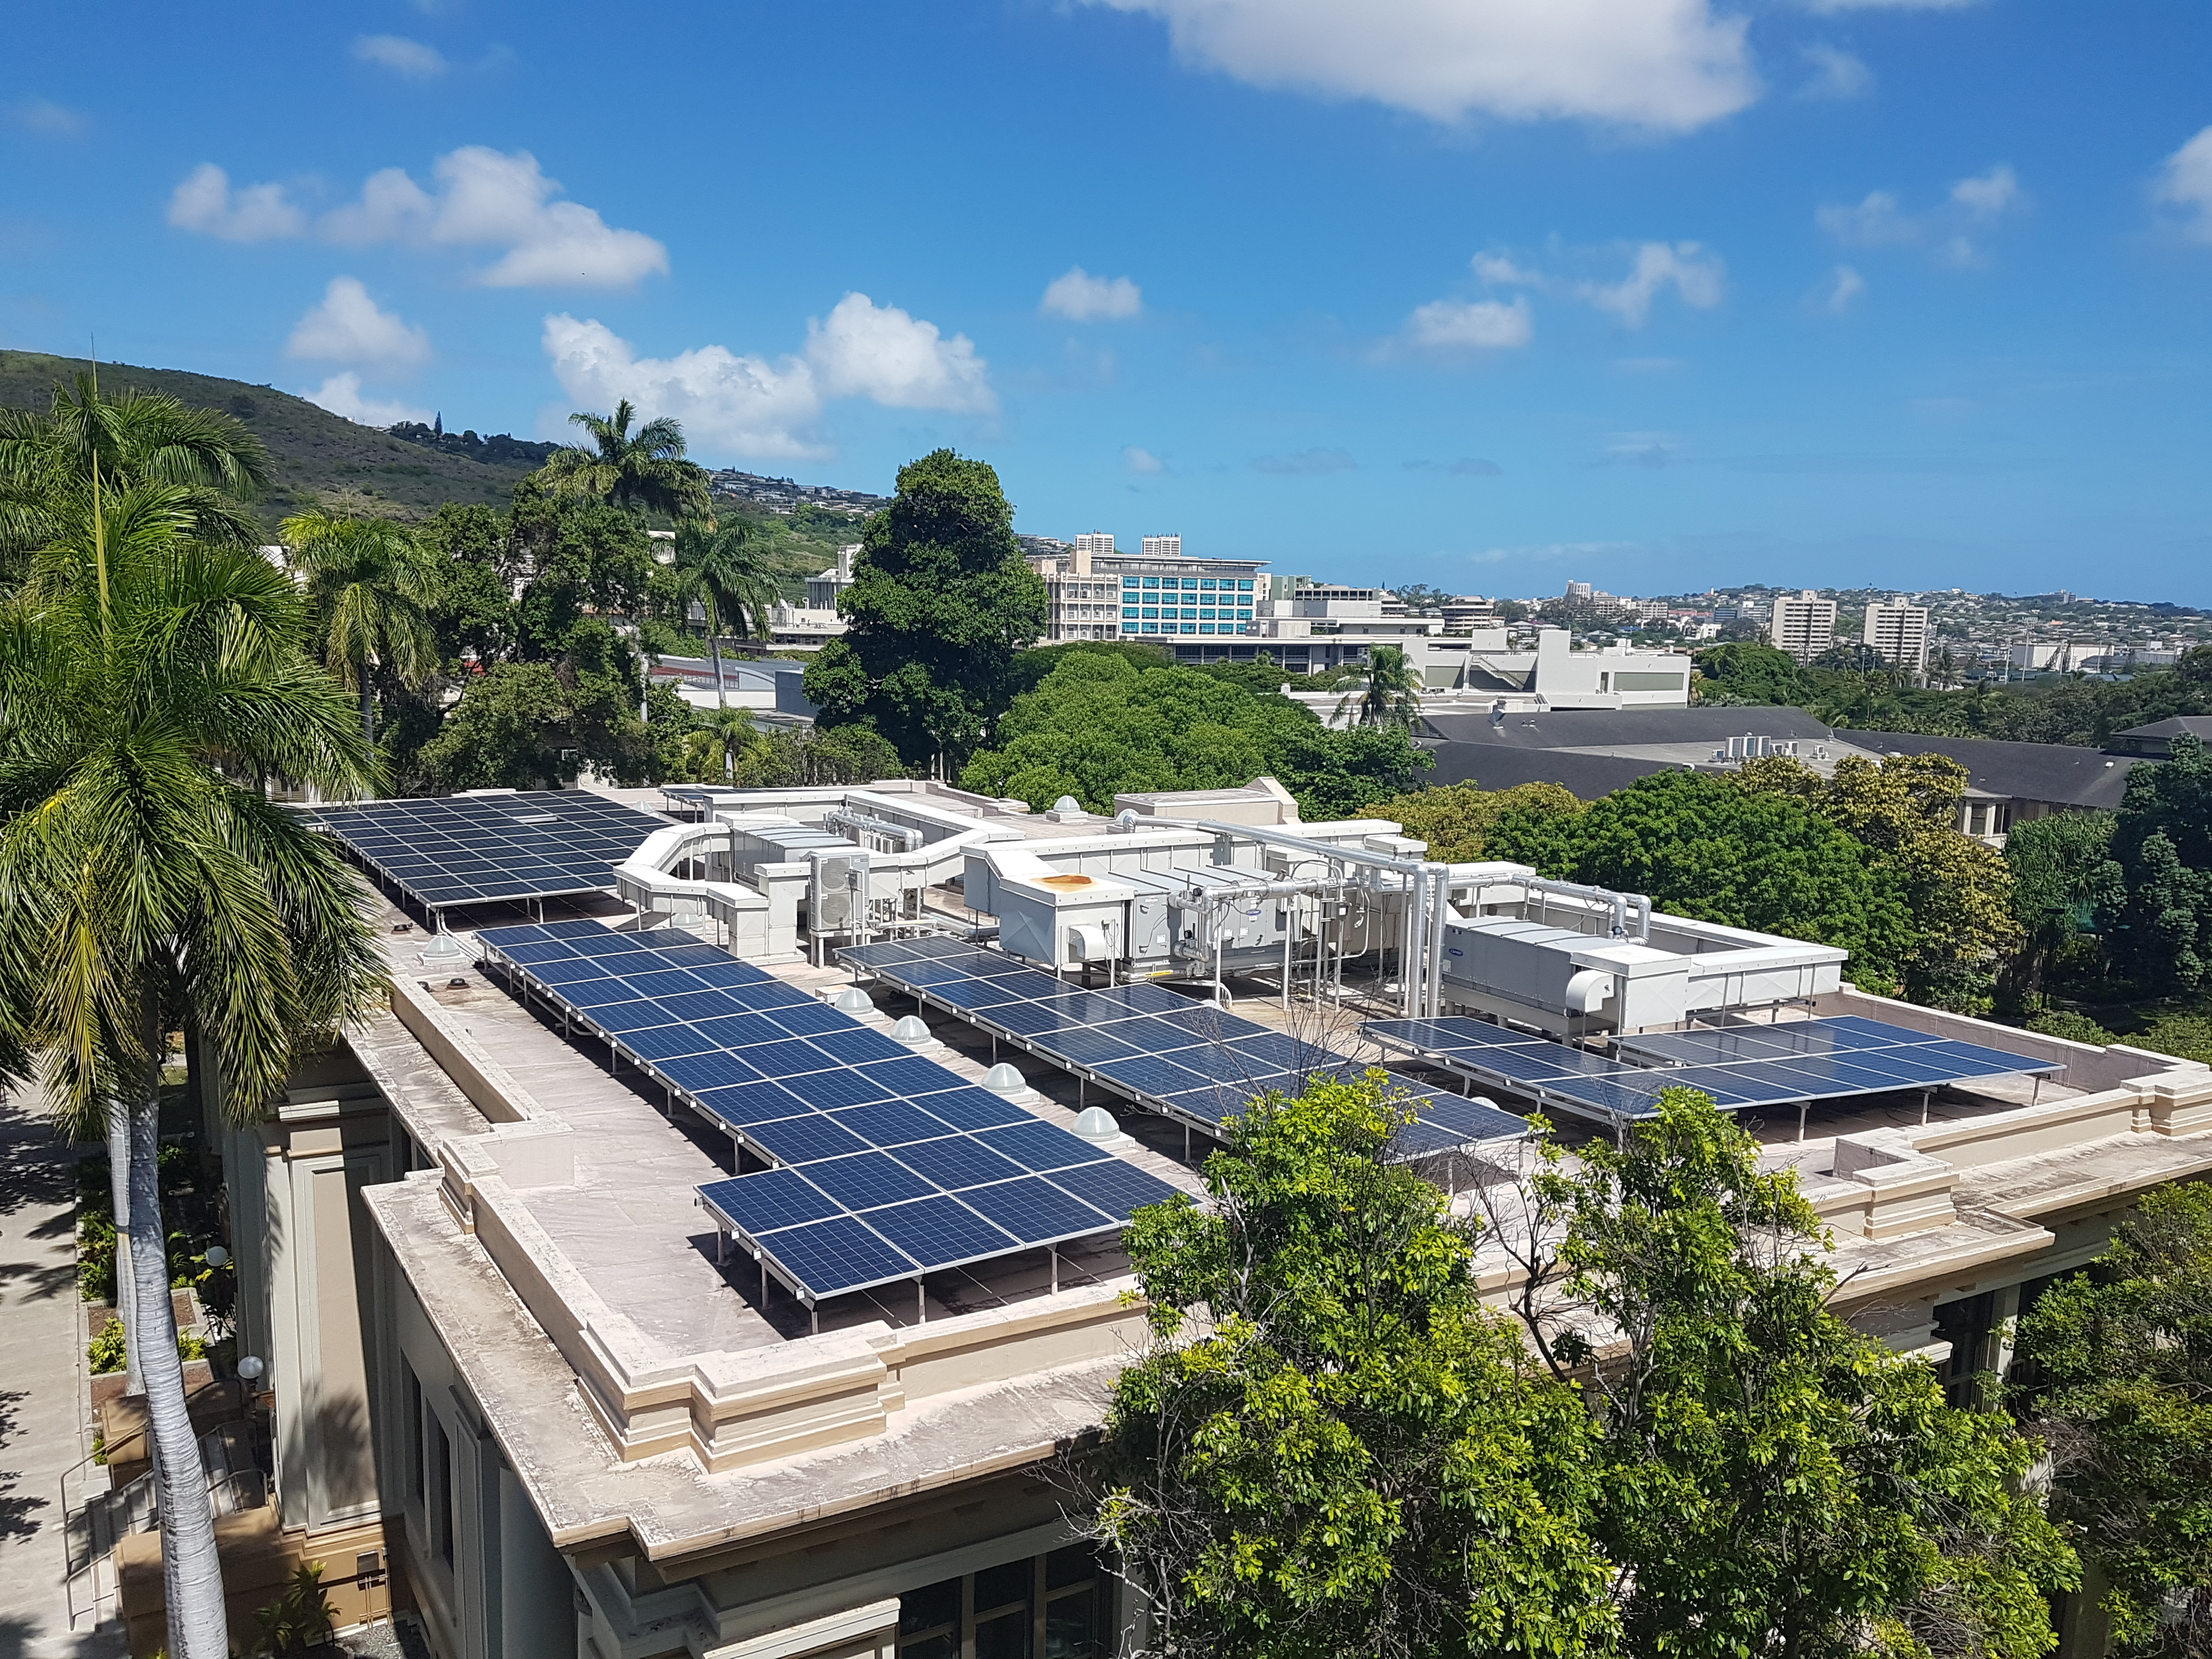 Rooftop photovoltaic panels on Gartley Hall